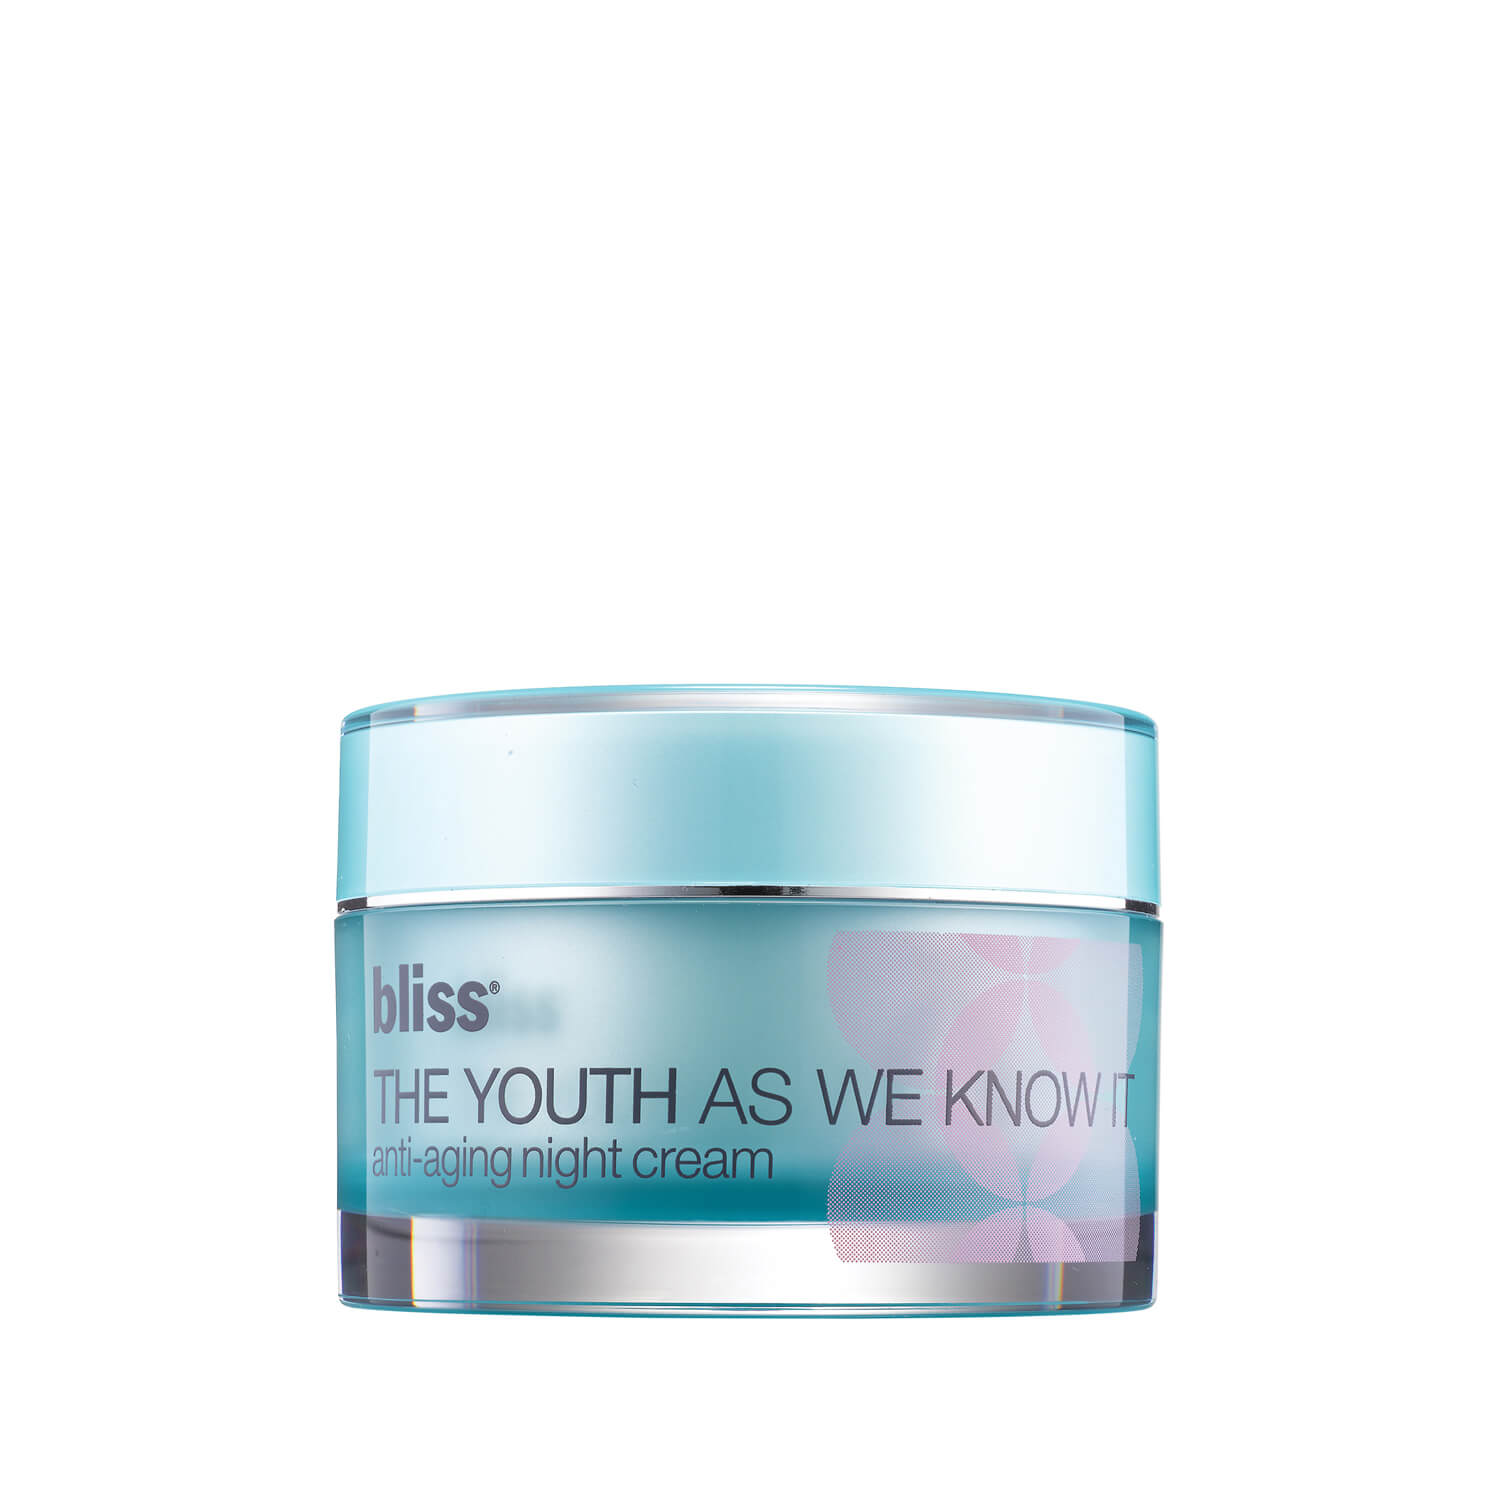 bliss The Youth As We Know It Anti-Aging Night Cream (50ml)